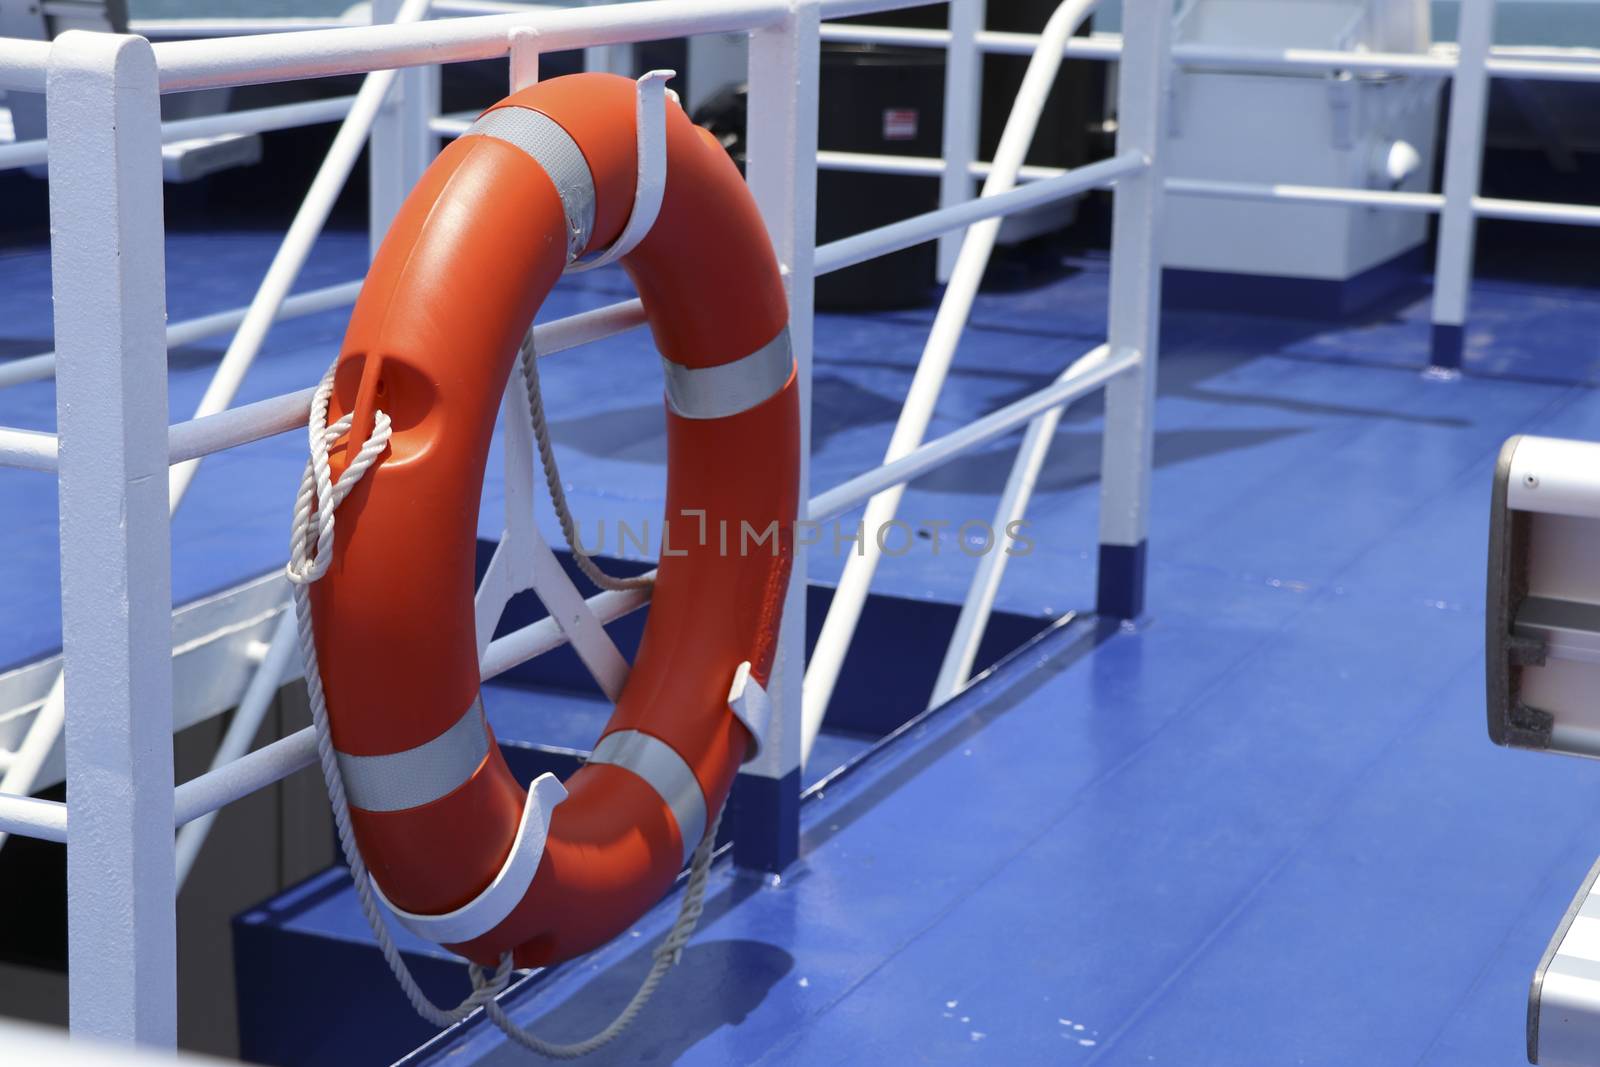 Lifebuoy rings on board for rescuing passengers. Lifebuoy rings mounted on the boat ready to save those who fell into the water.